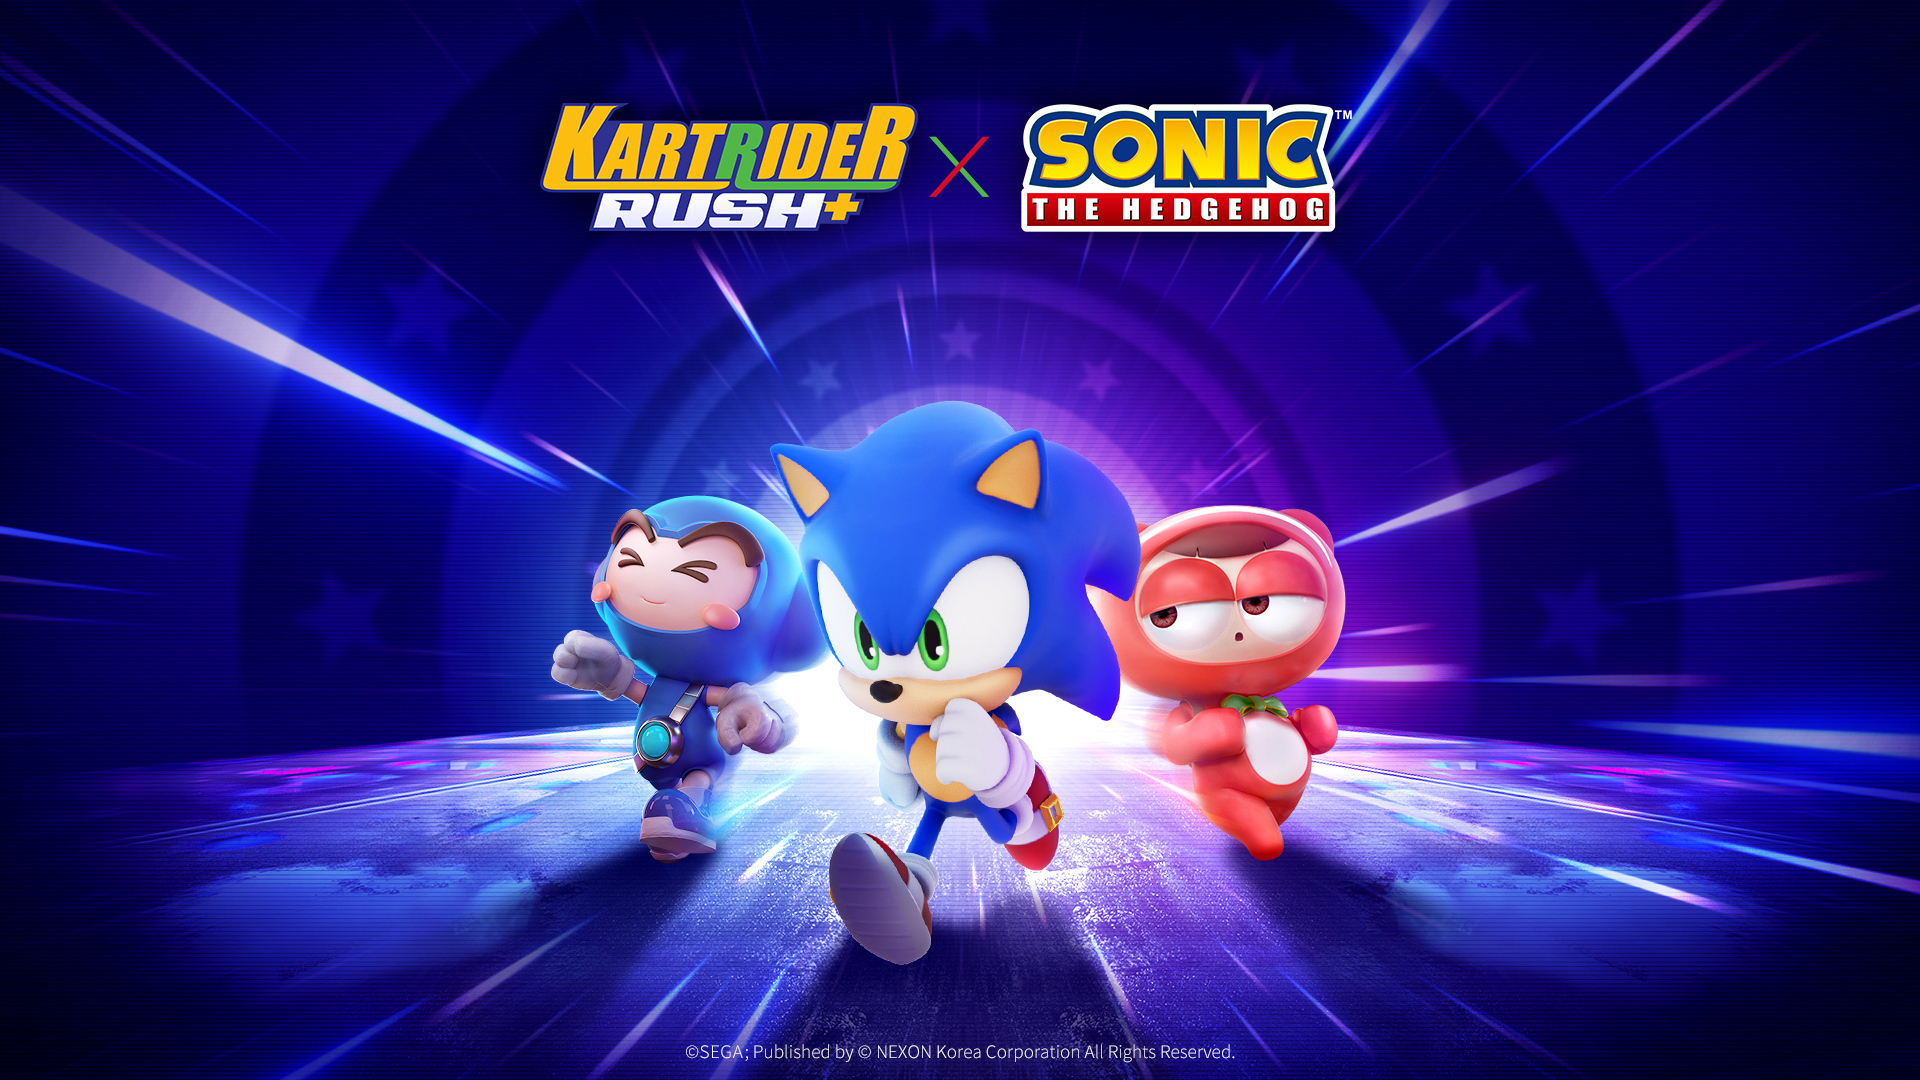 Kartrider Rush+ Joins Forces With Sega'S Sonic The Hedgehog! | Business Wire